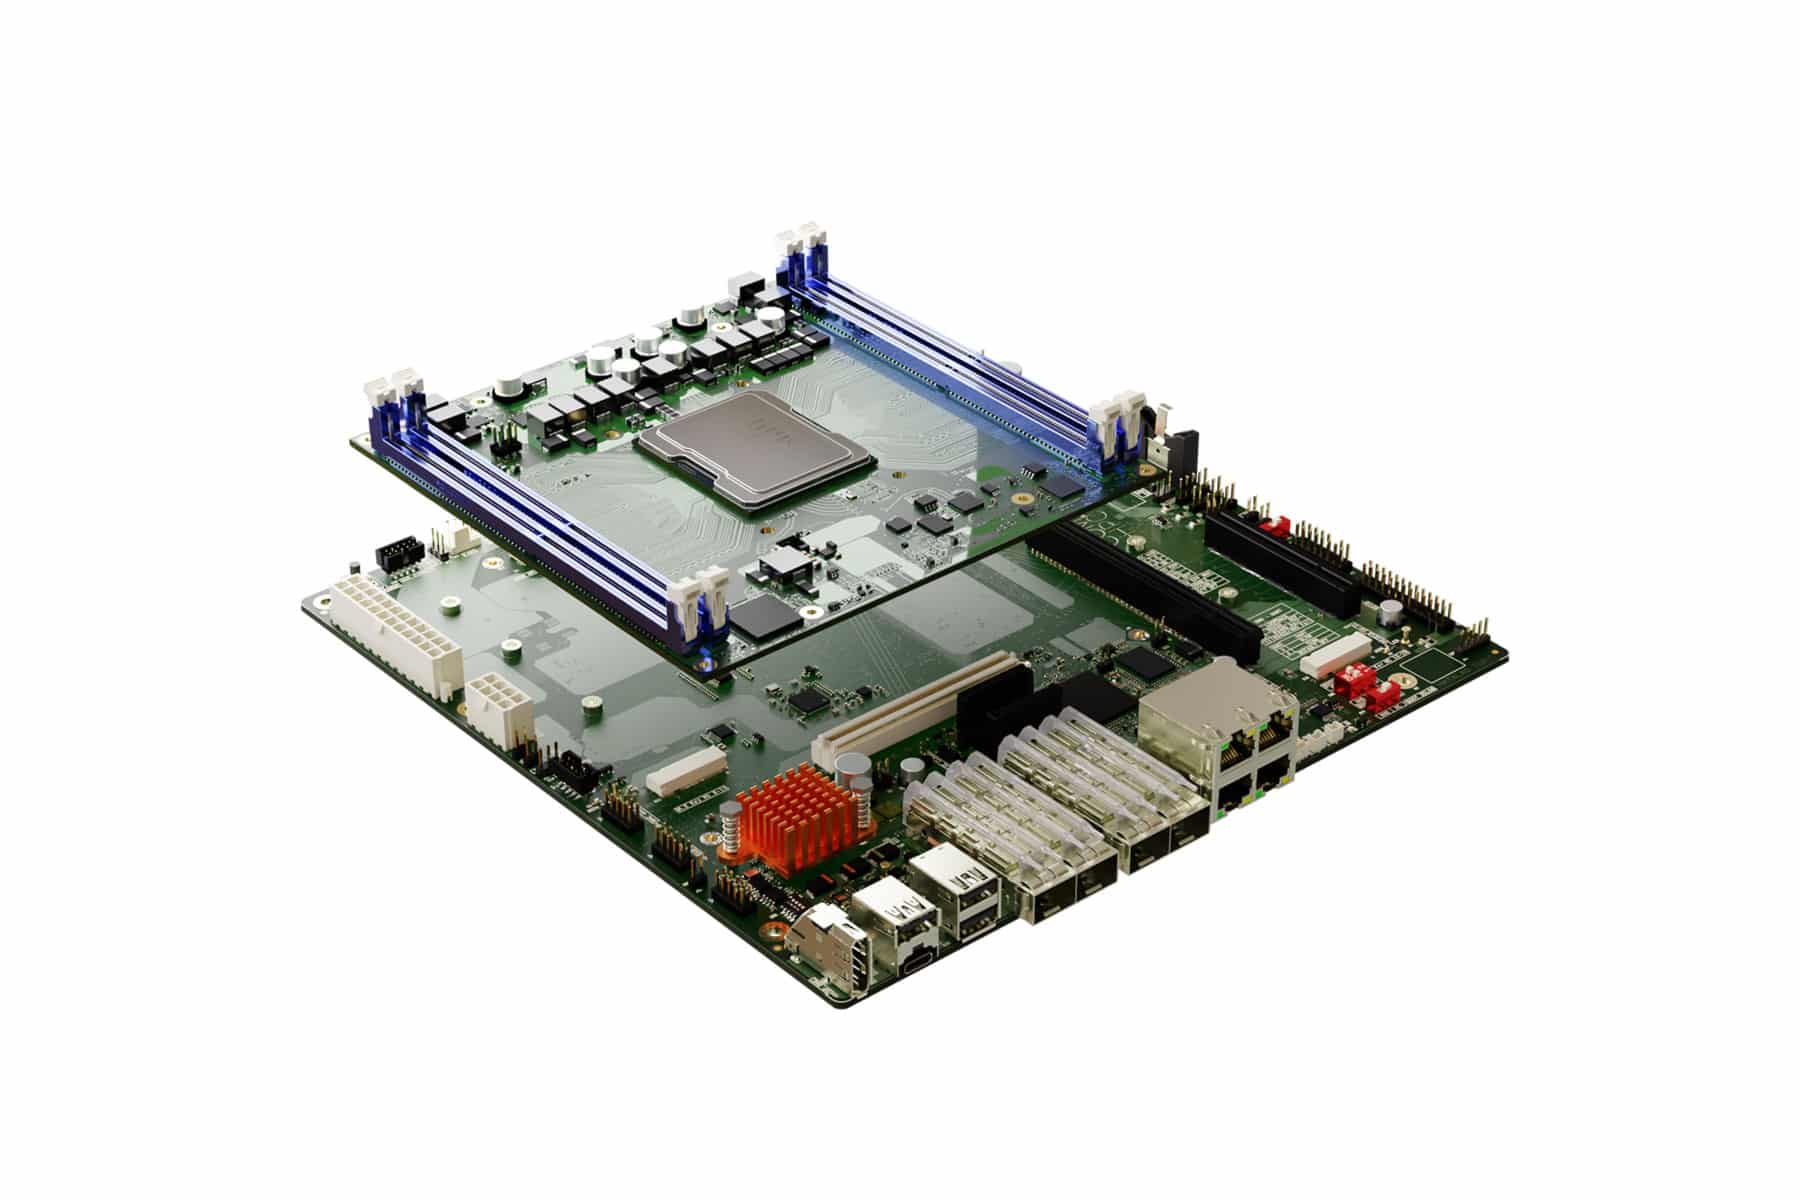 Compact Board And Modules Expand Edge Server Options